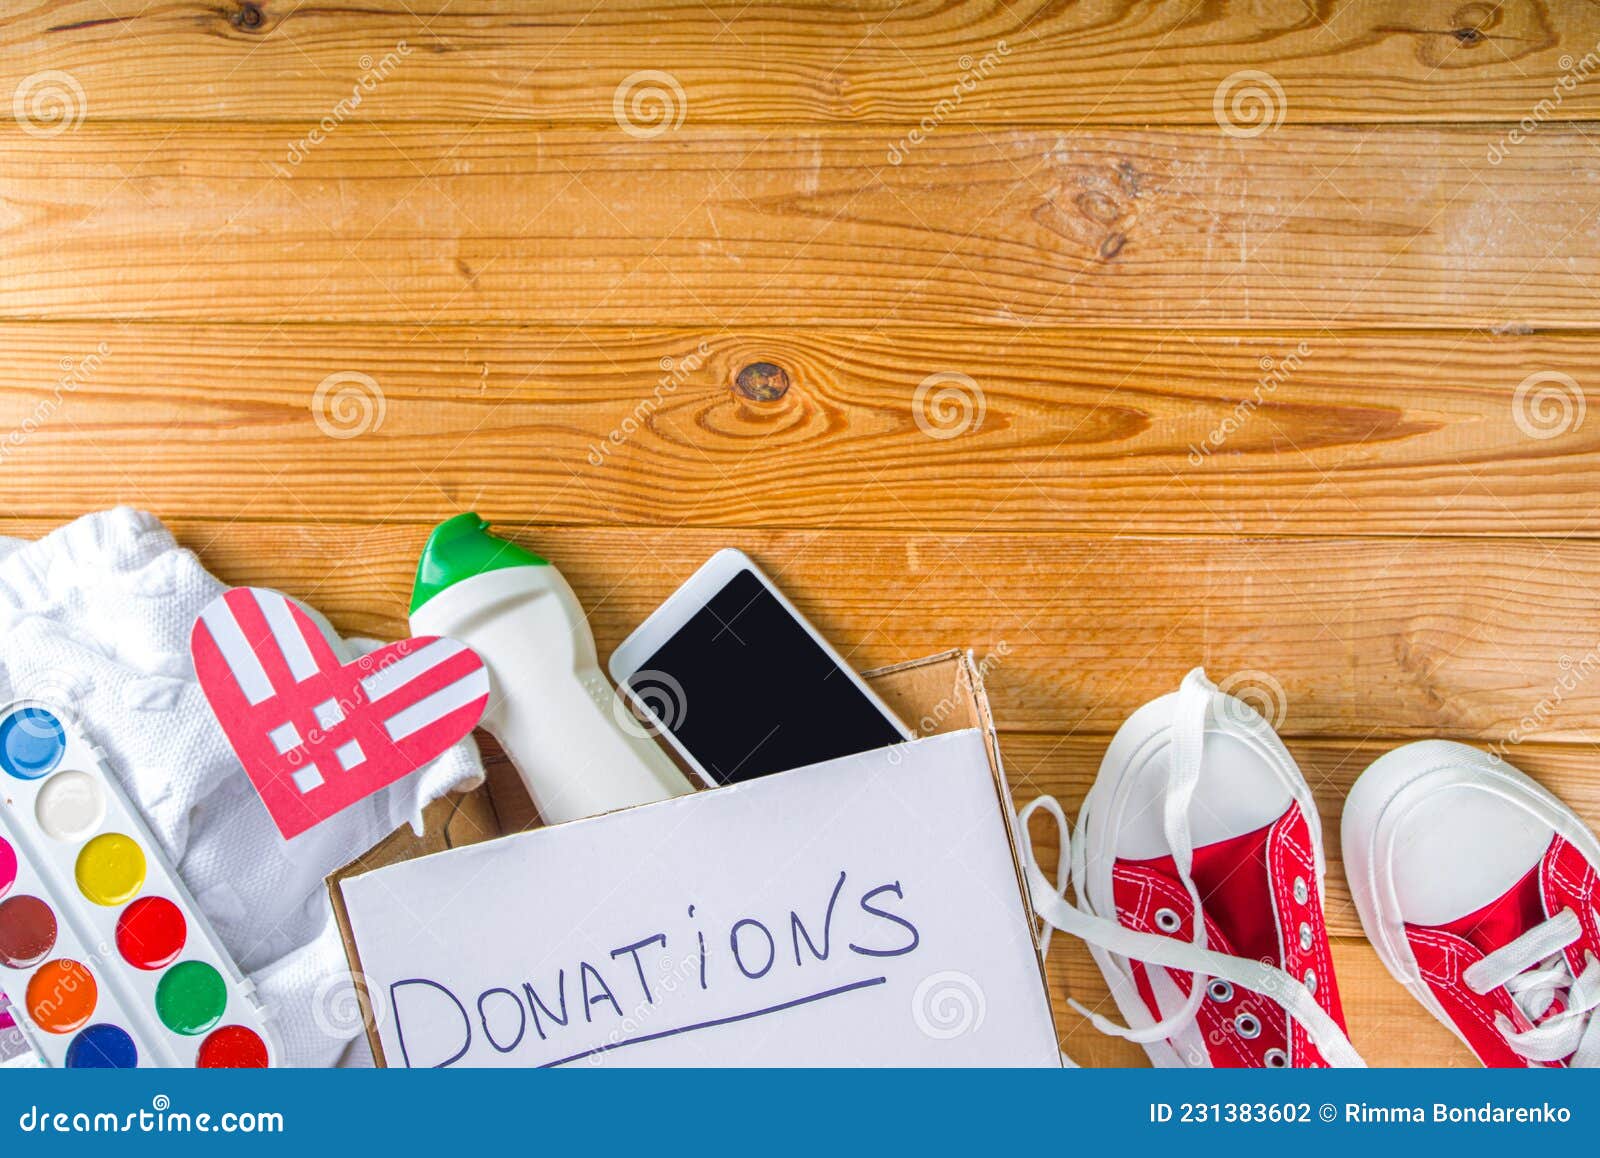 Giving Tuesday And Donation Concept Stock Photo Image Of Giving